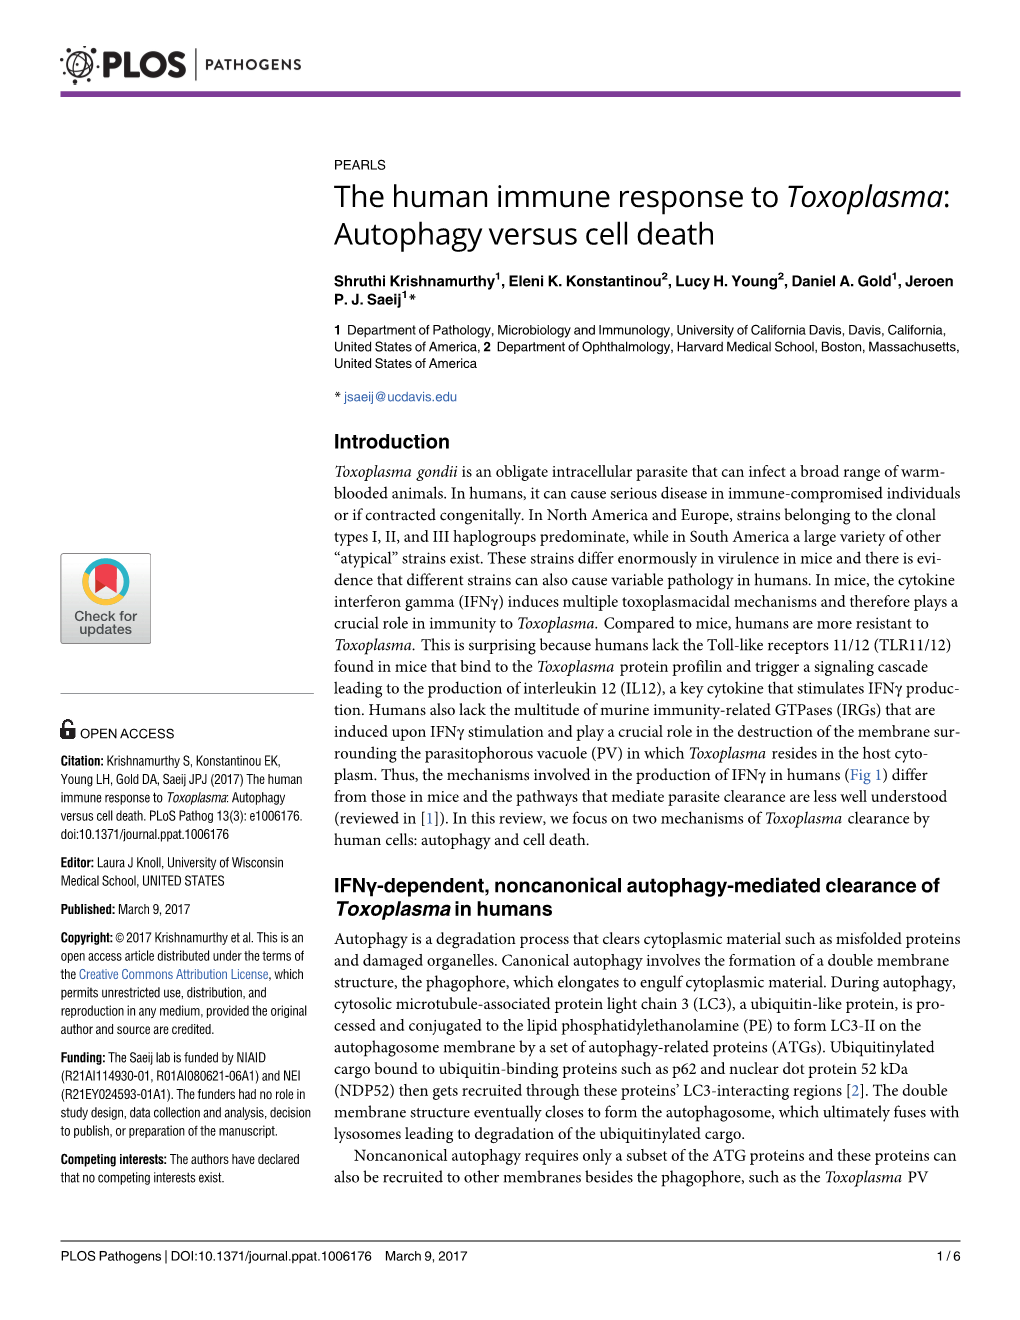 The Human Immune Response to Toxoplasma: Autophagy Versus Cell Death